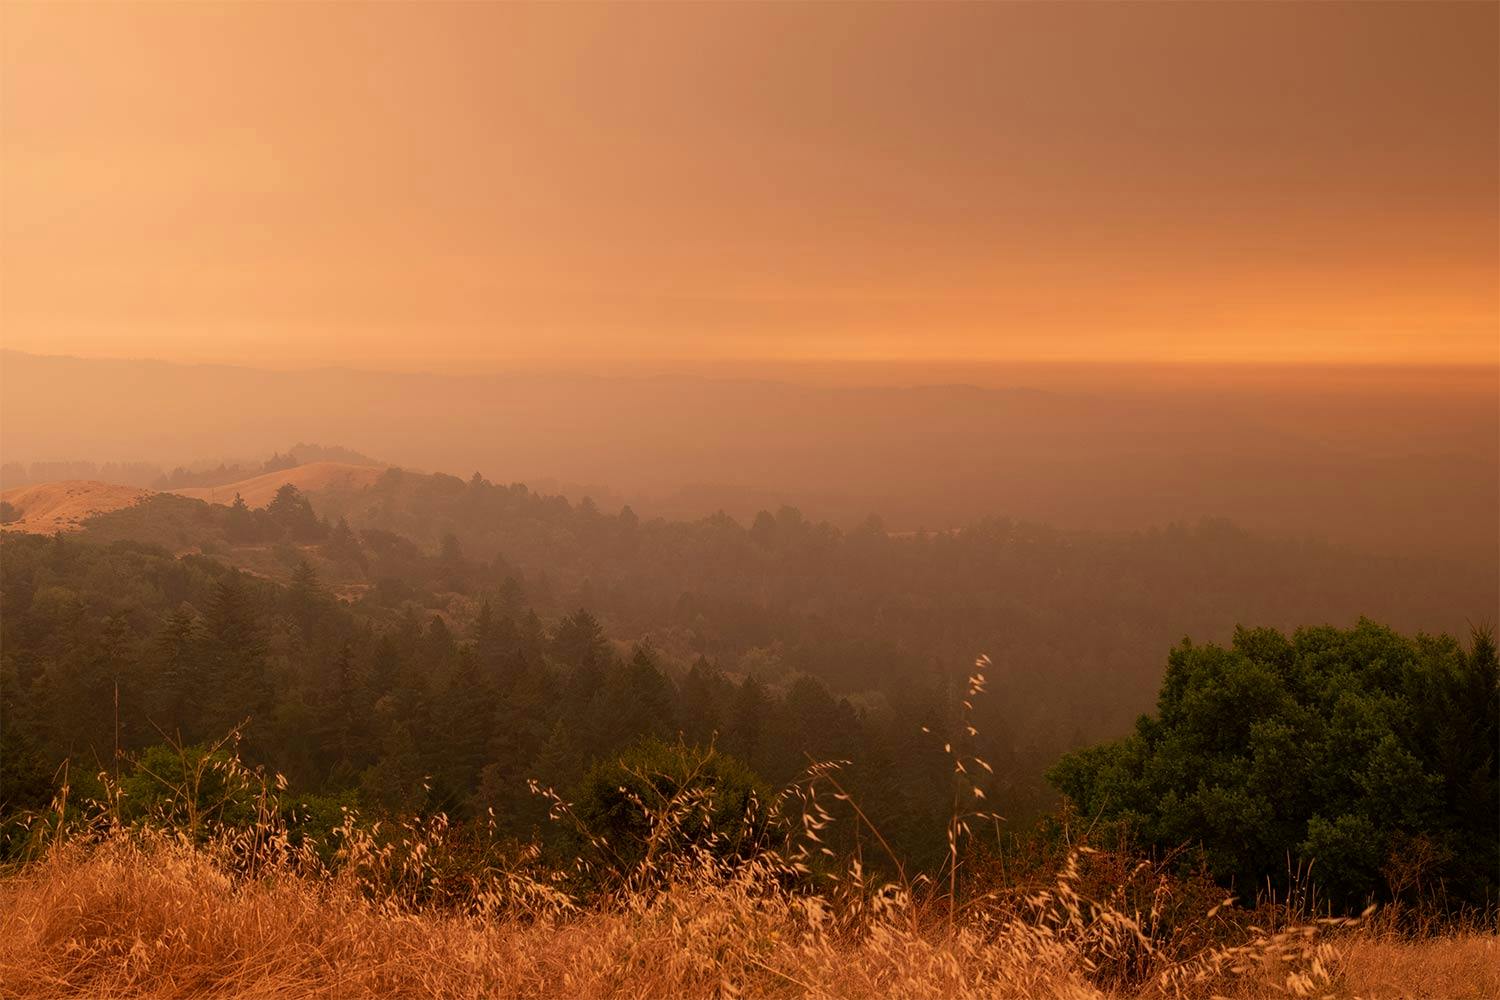 Tree-covered hills in California's Santa Cruz Mountains appear under an orange haze caused by wildfire smoke.